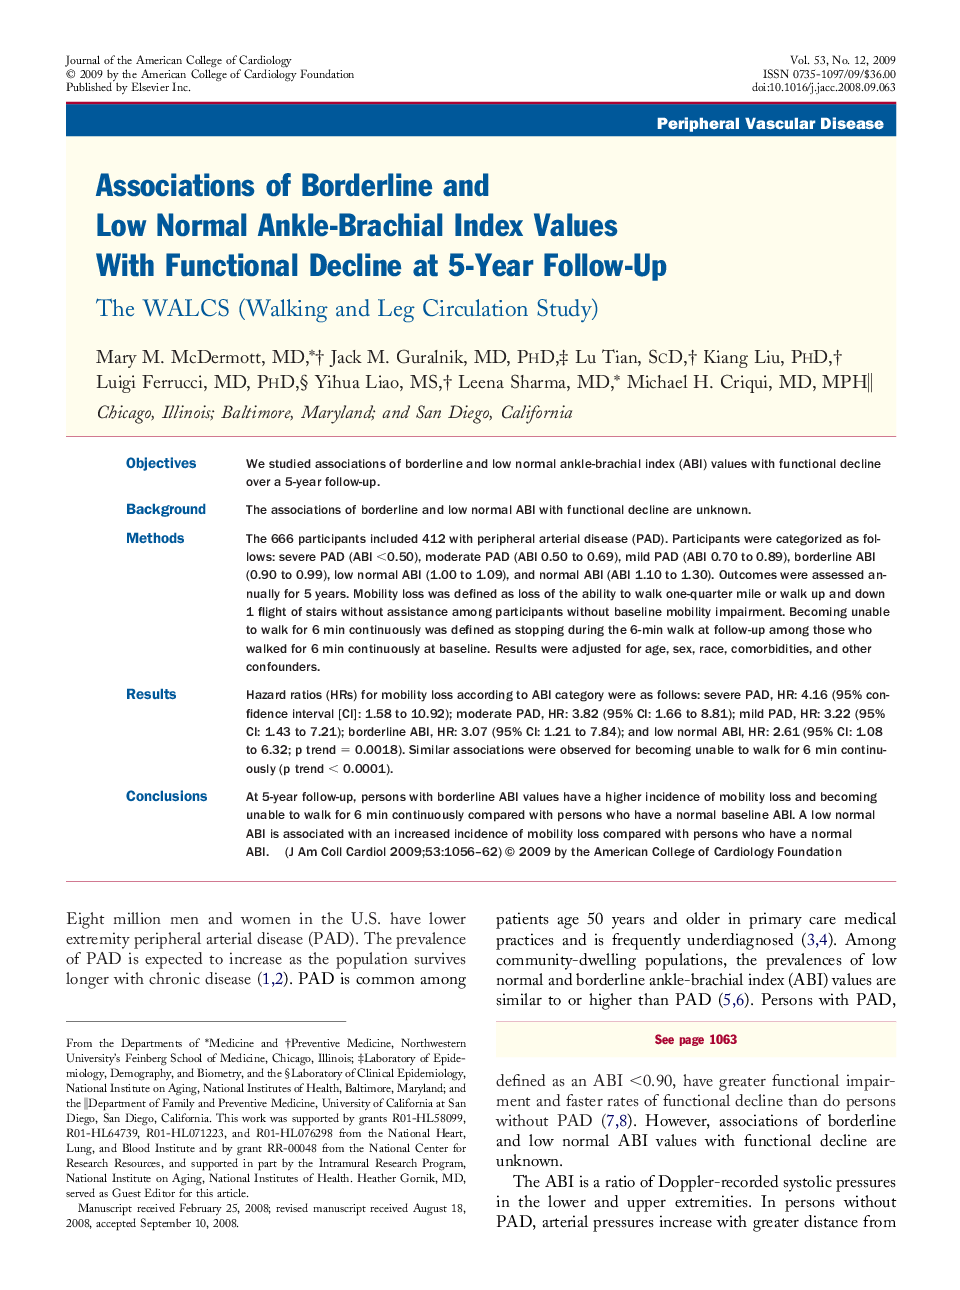 Associations of Borderline and Low Normal Ankle-Brachial Index Values With Functional Decline at 5-Year Follow-Up : The WALCS (Walking and Leg Circulation Study)